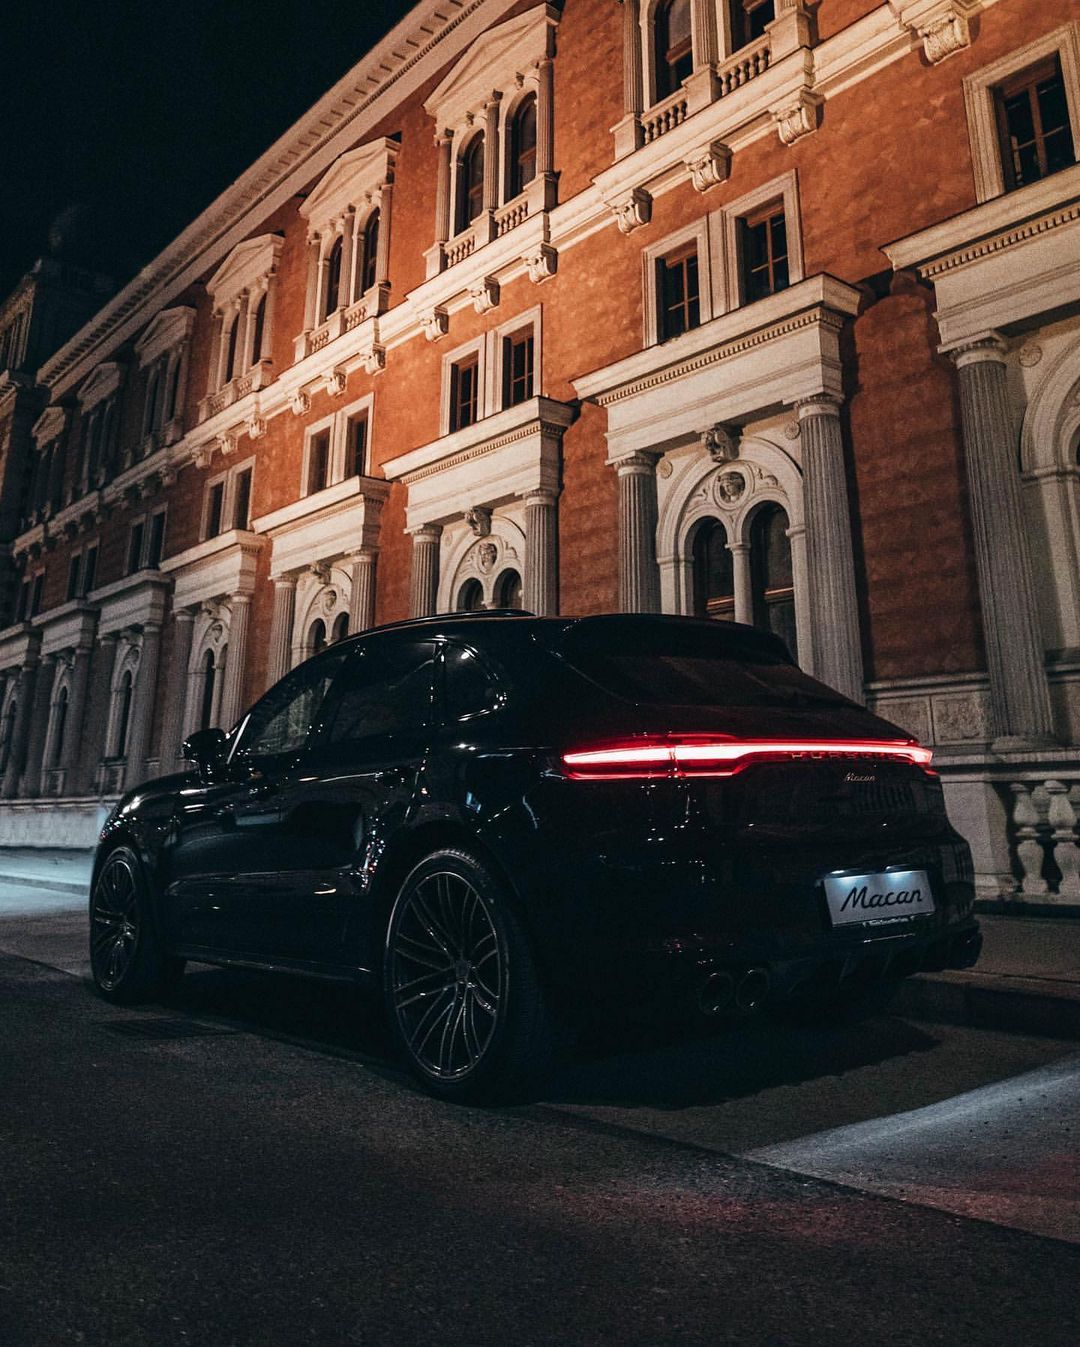 Black Porsche Macan outside lit-up building at night